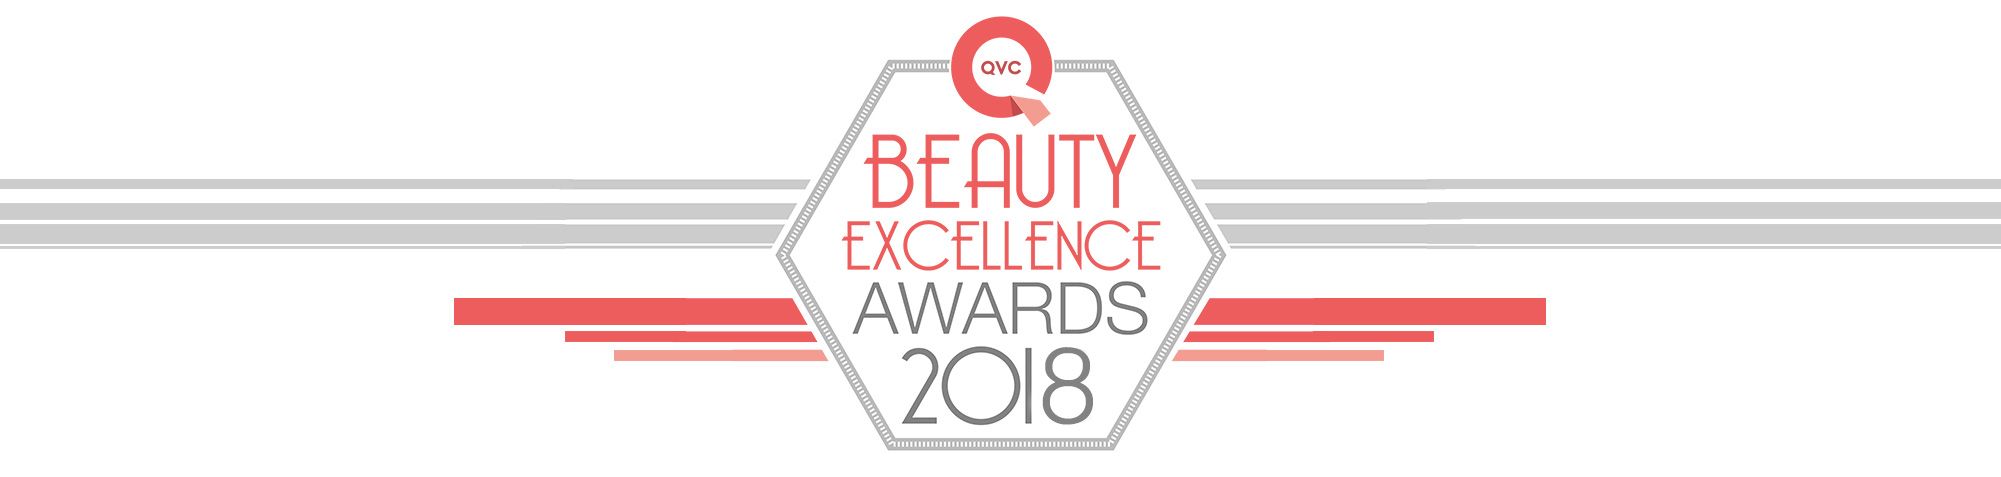 Beauty Excellence Awards